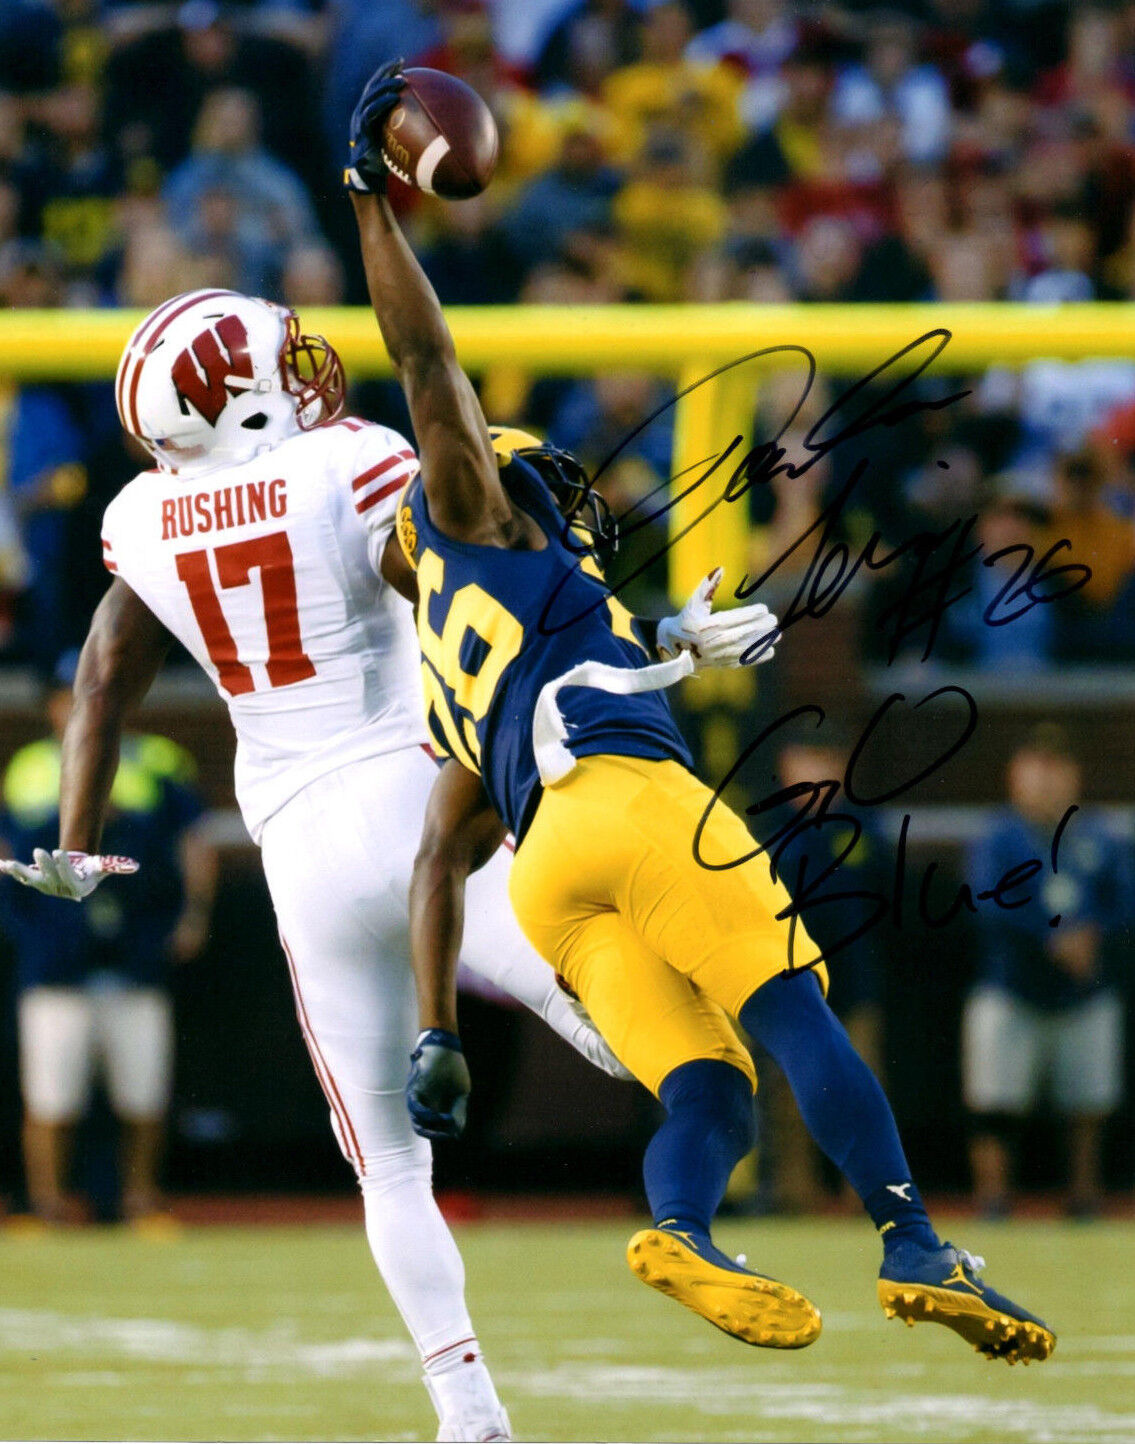 Jourdan Lewis Reprinted auto signed 8x10 football Photo Poster painting Michigan Wolverines INT!